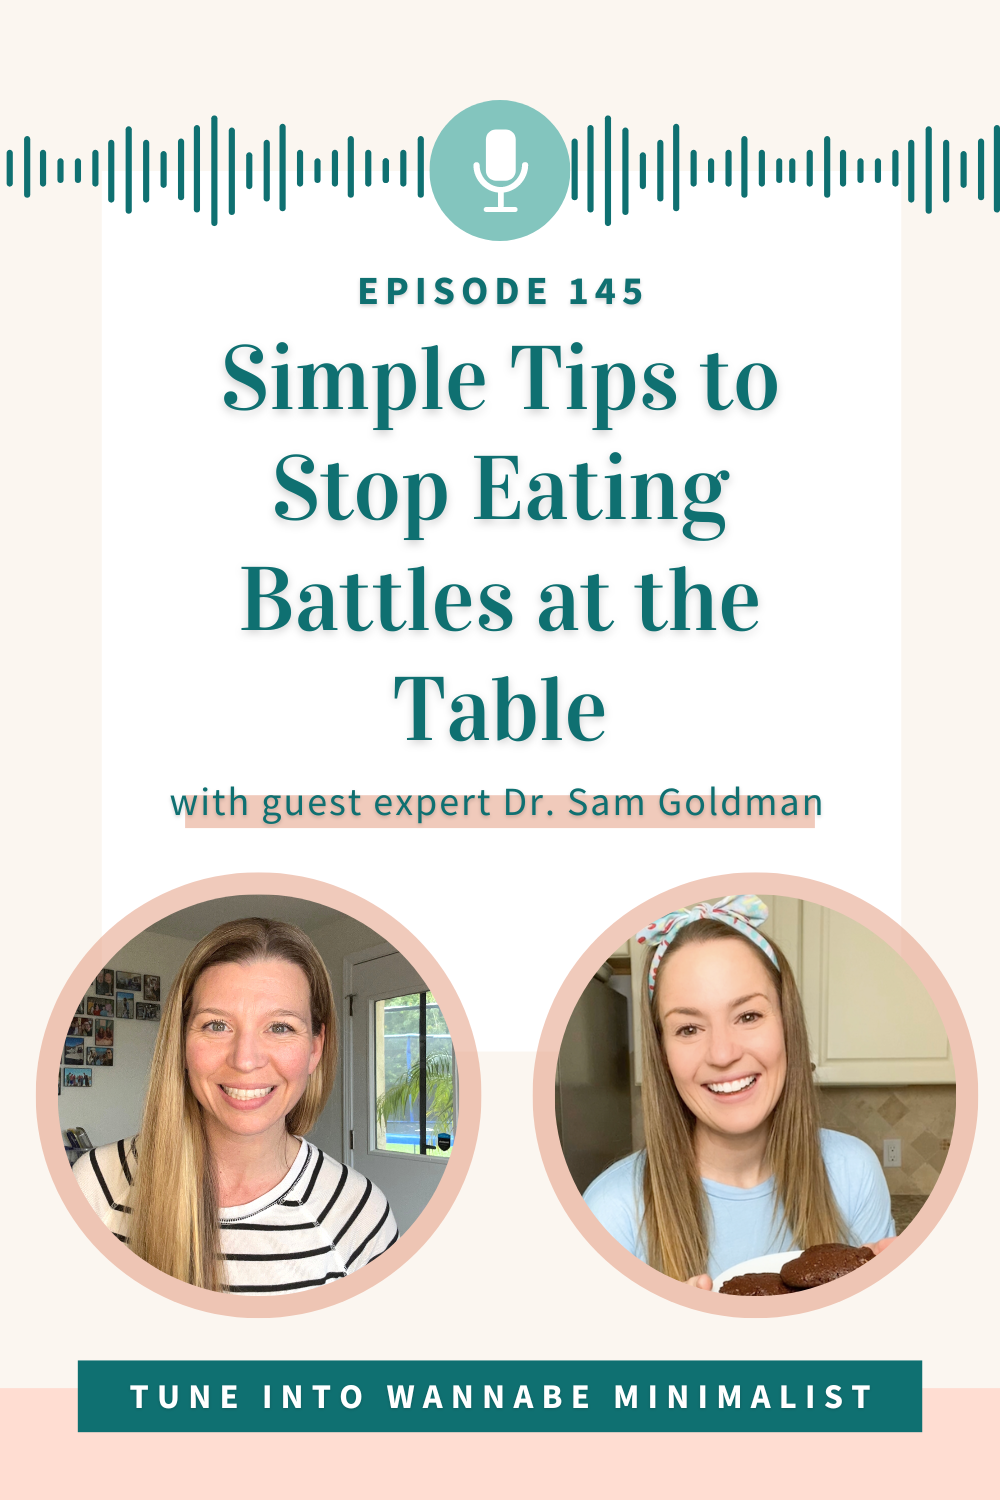 Simple Tips to Stop Eating Battles at the Table